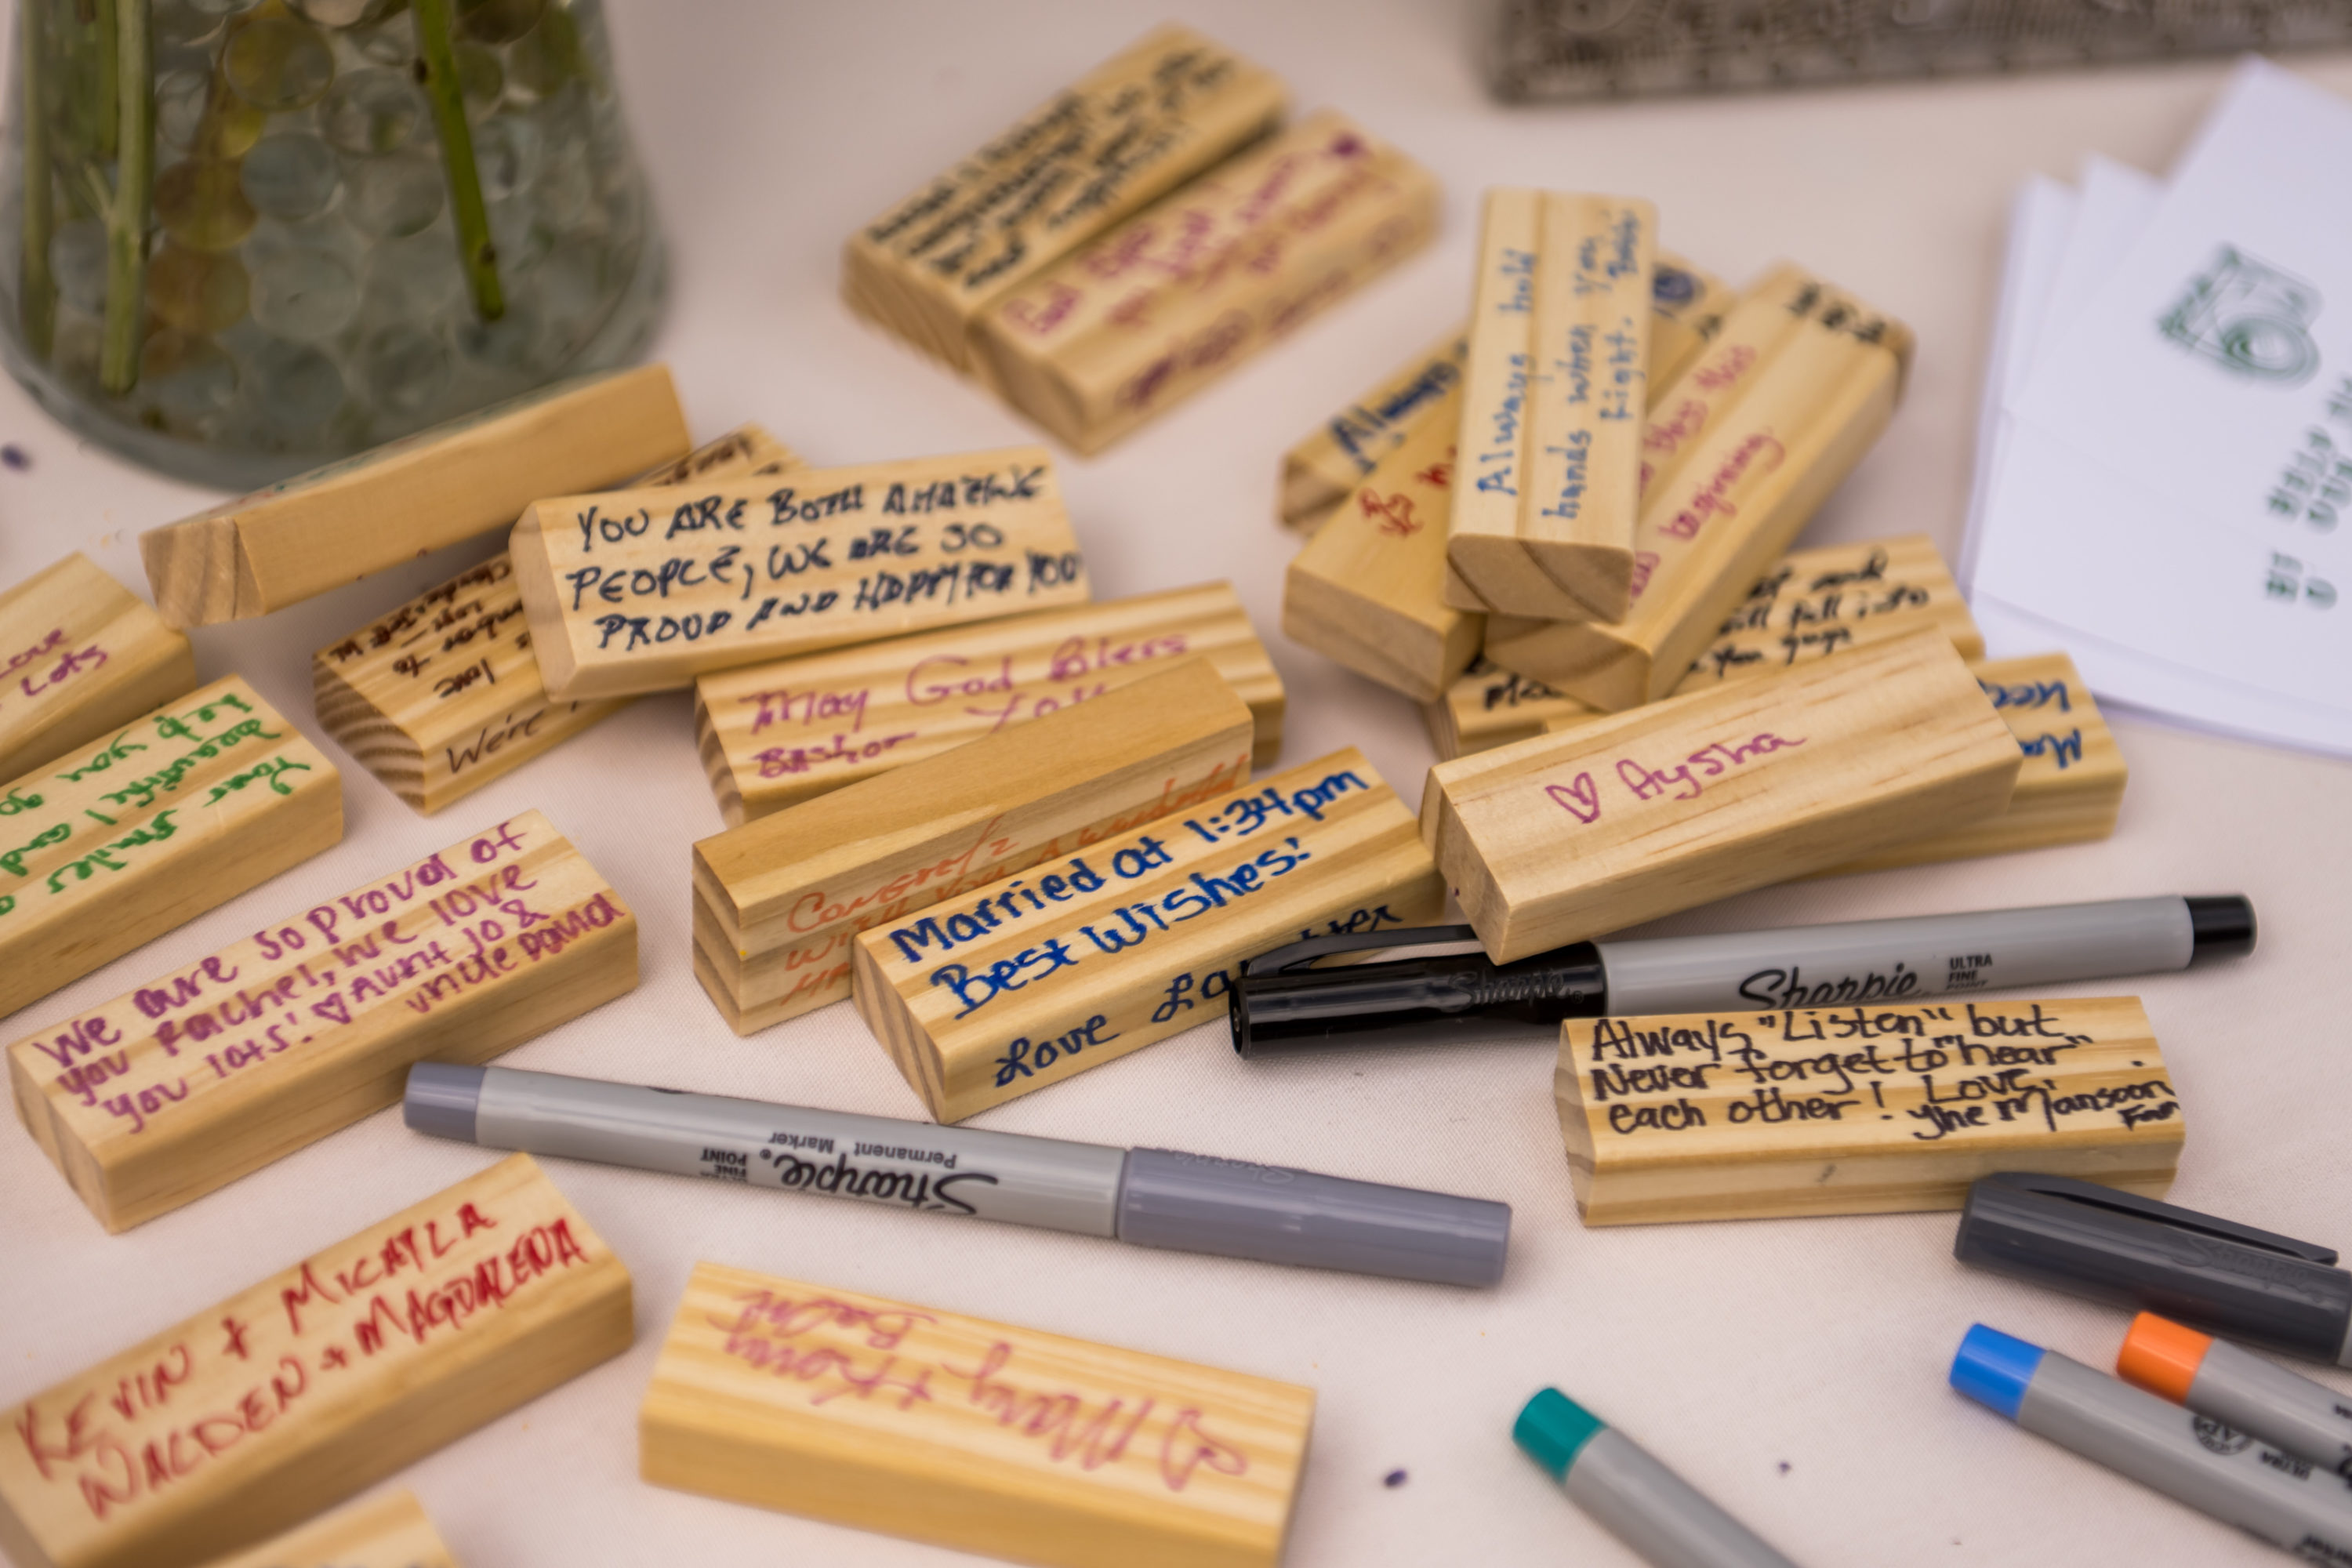 Guests left notes for the bride and groom during a wedding in Telluride, Colorado.